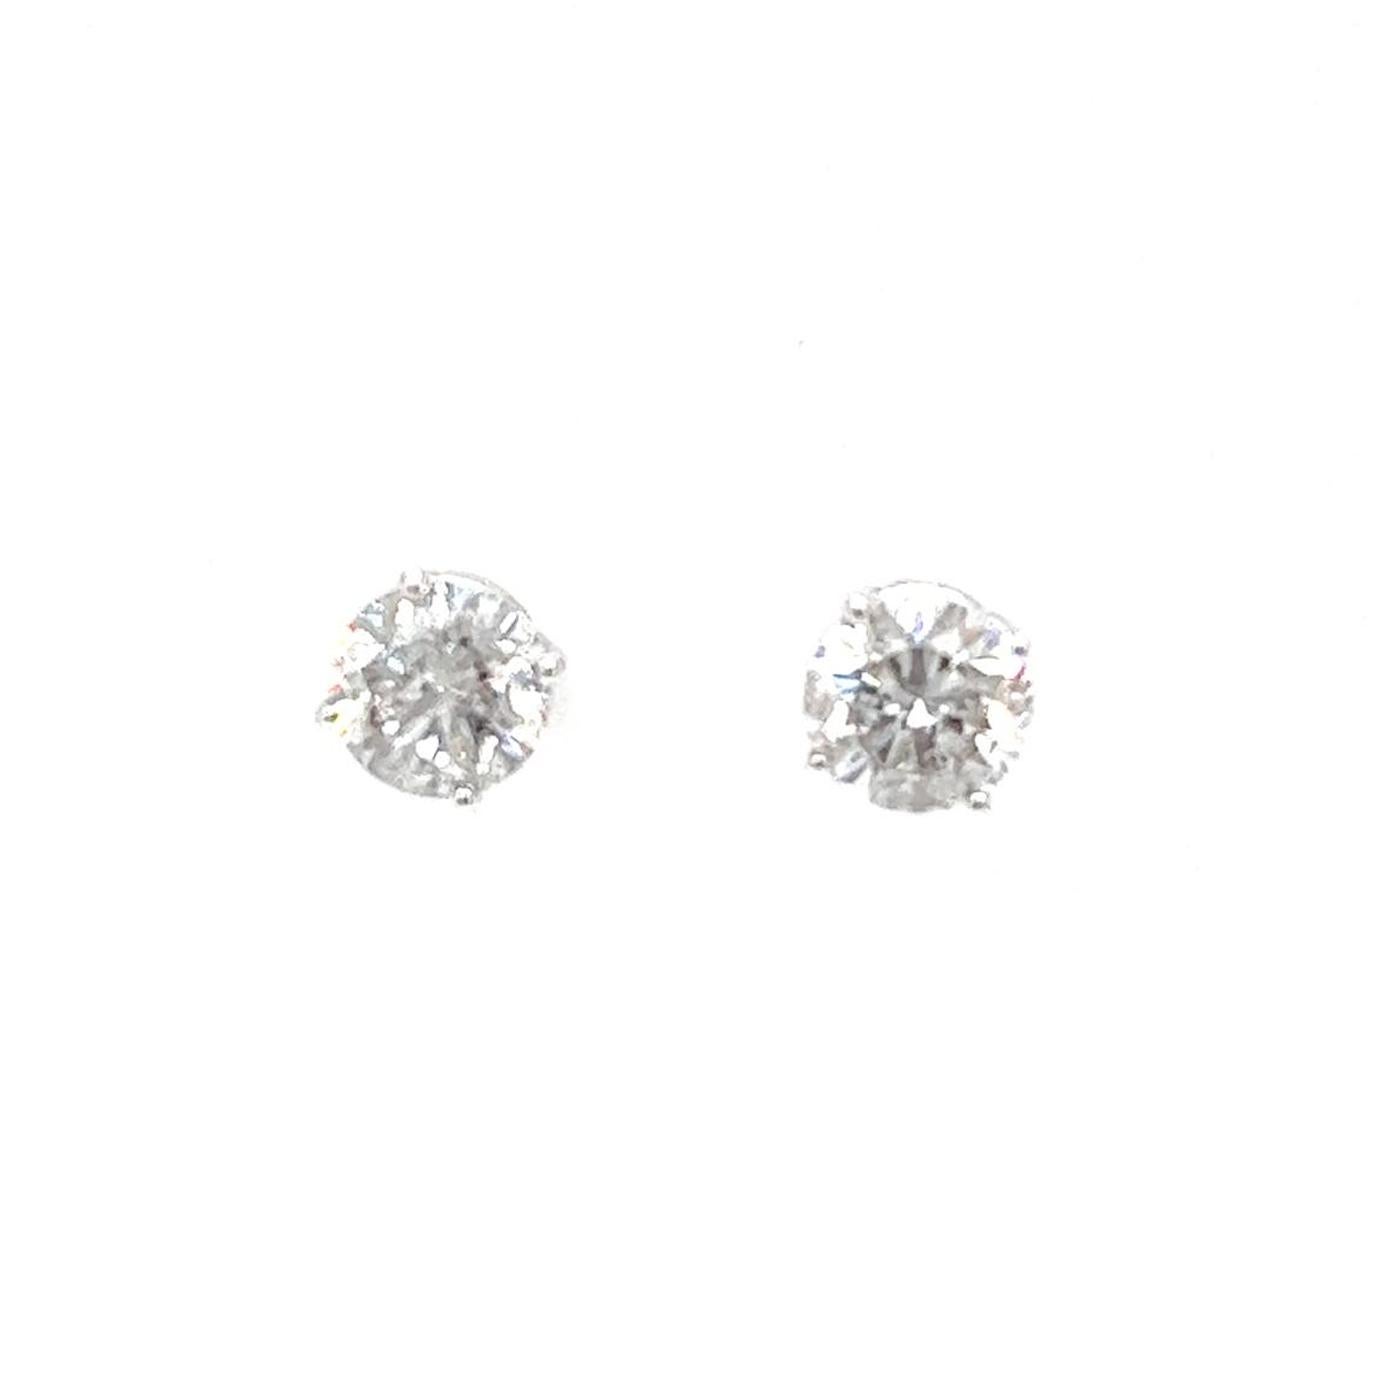 4.02ct Natural Round Diamonds Stud Earring 14K White Gold 4 Prong Basket Setting In Good Condition For Sale In Aventura, FL